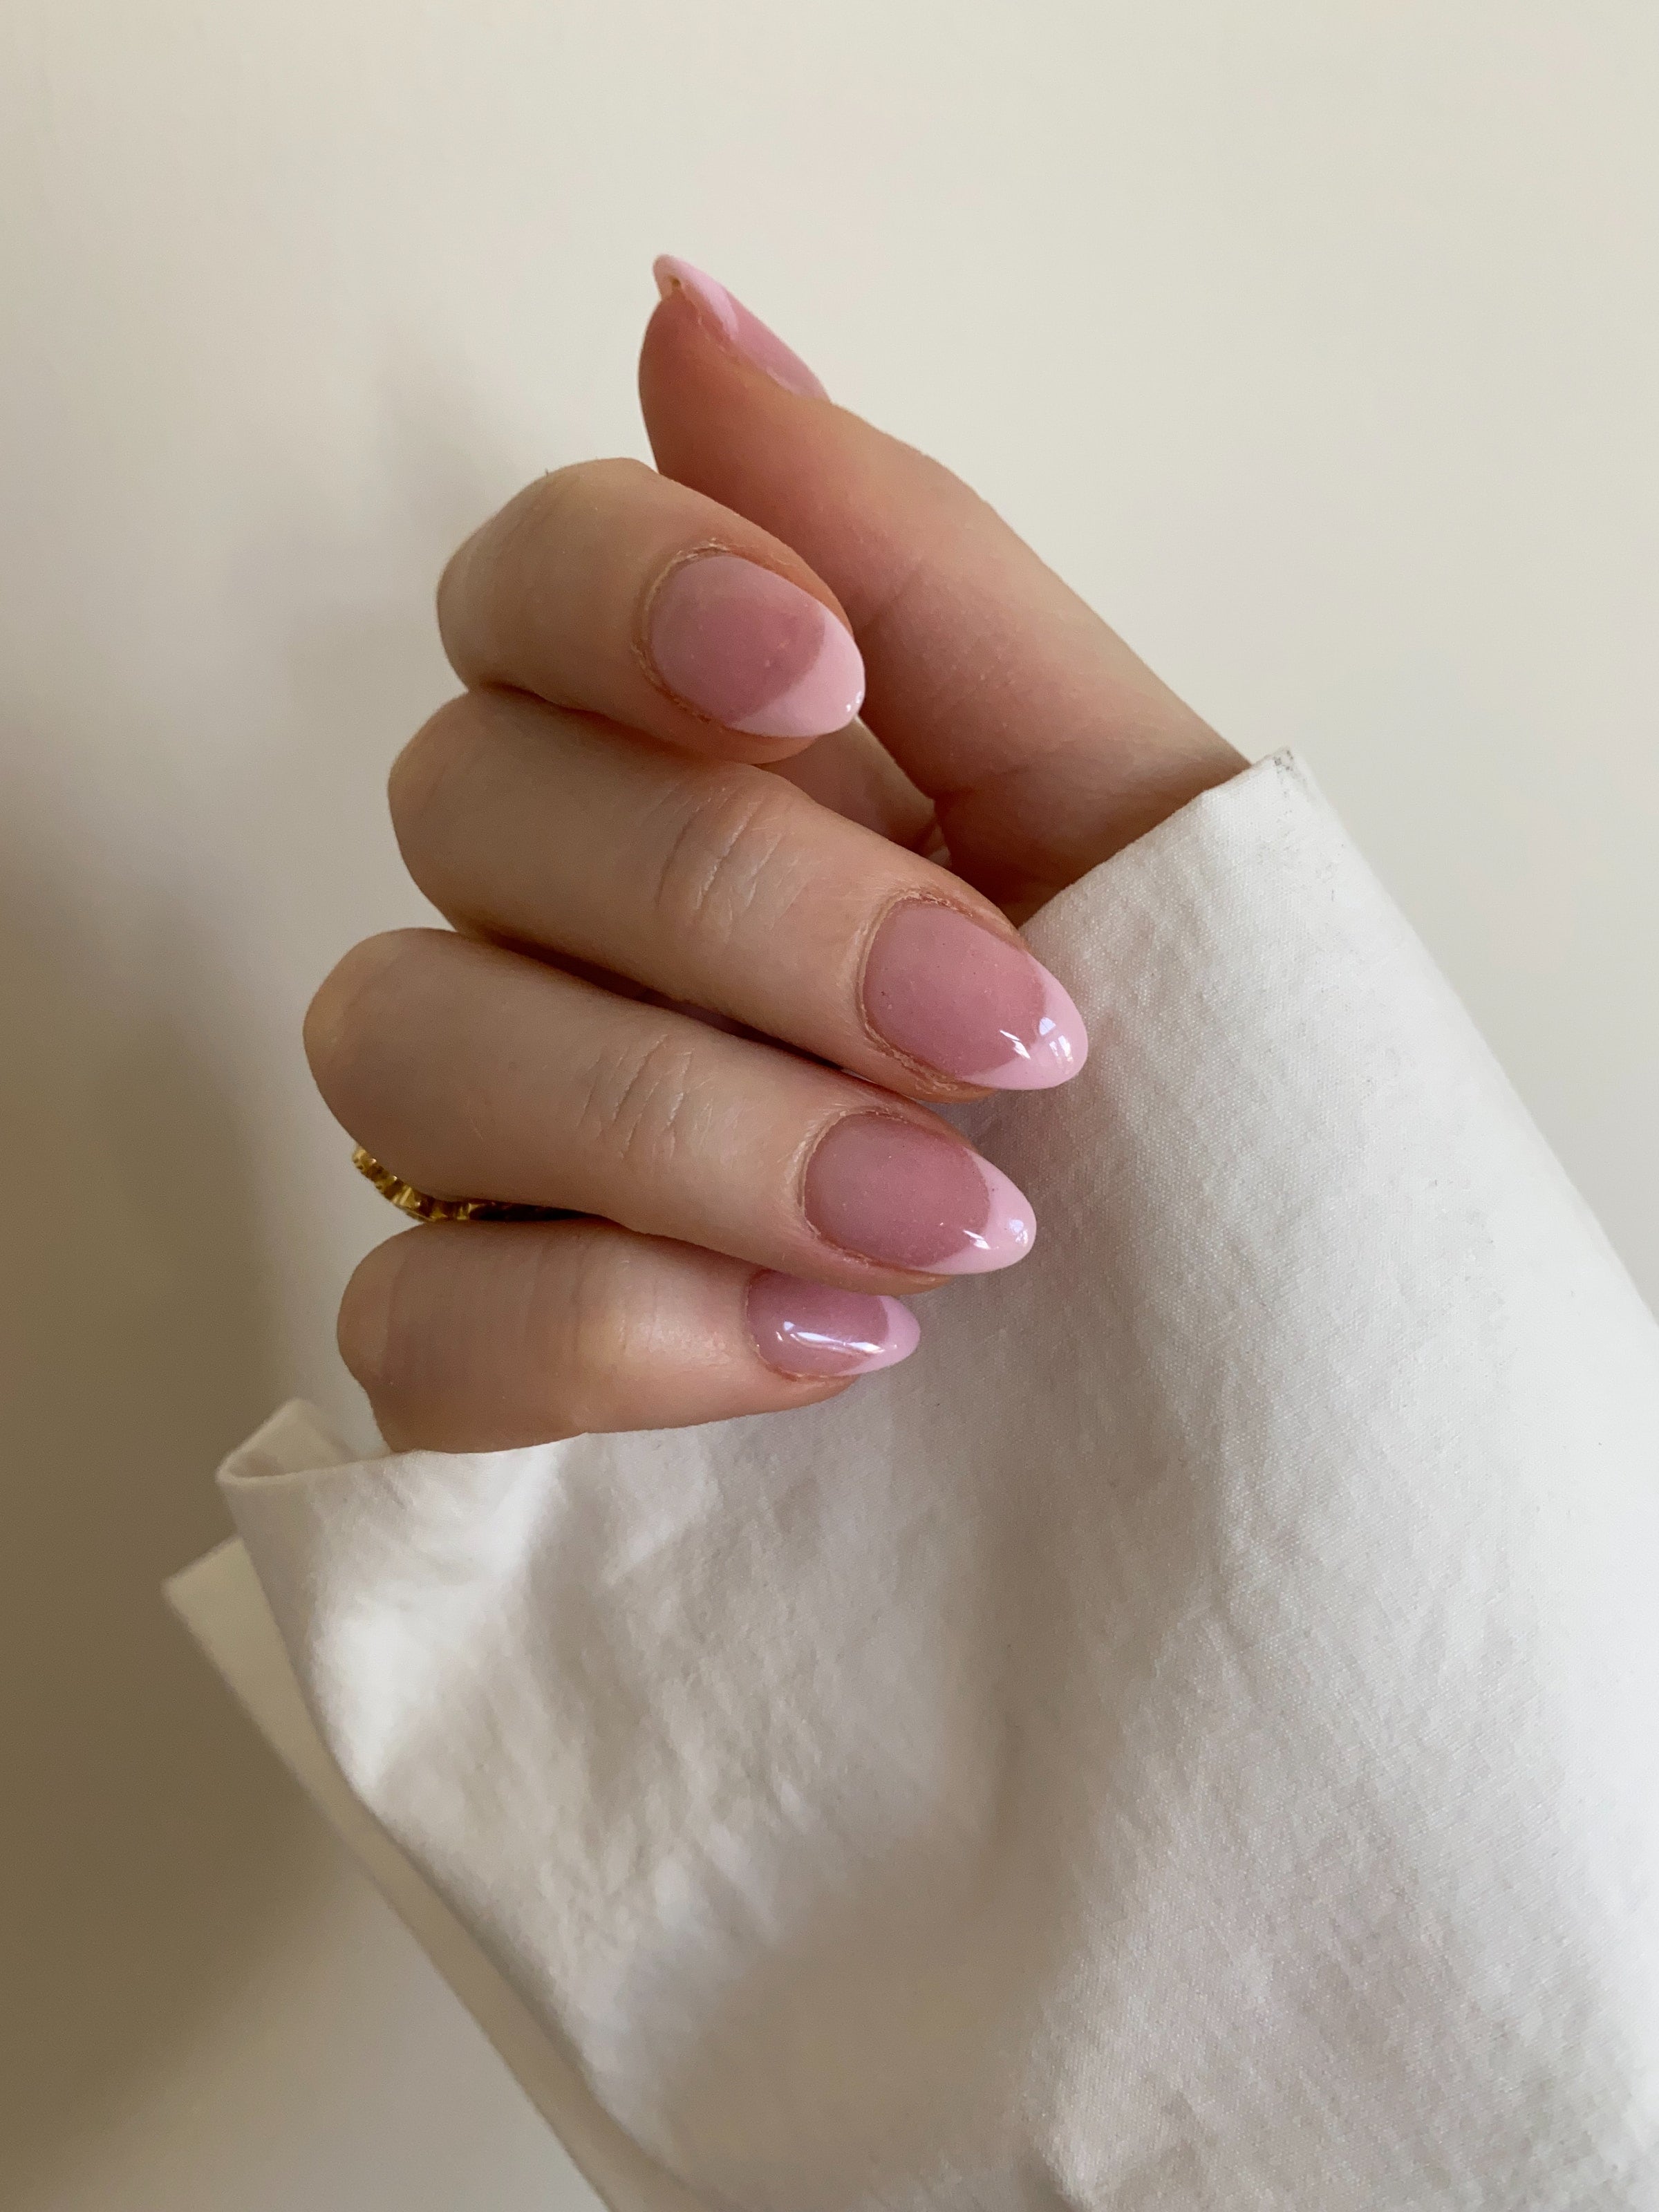 Hand in a loose fist showing semi transparent pink nails